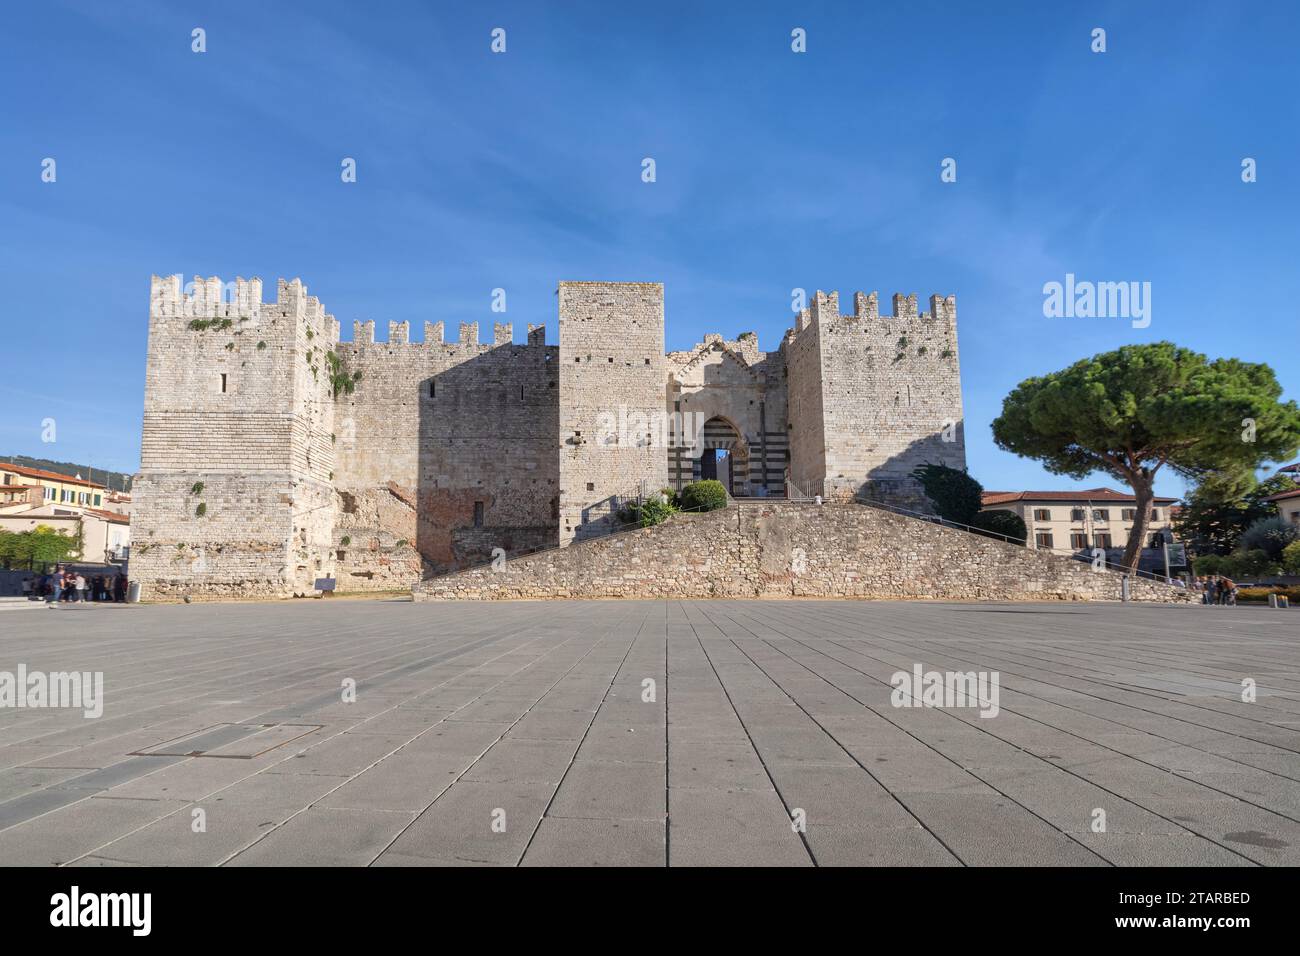 Castello dell'Imperatore - medieval castle with crenellated walls and towers built for emperor Frederick II in Prato, Italy Stock Photo